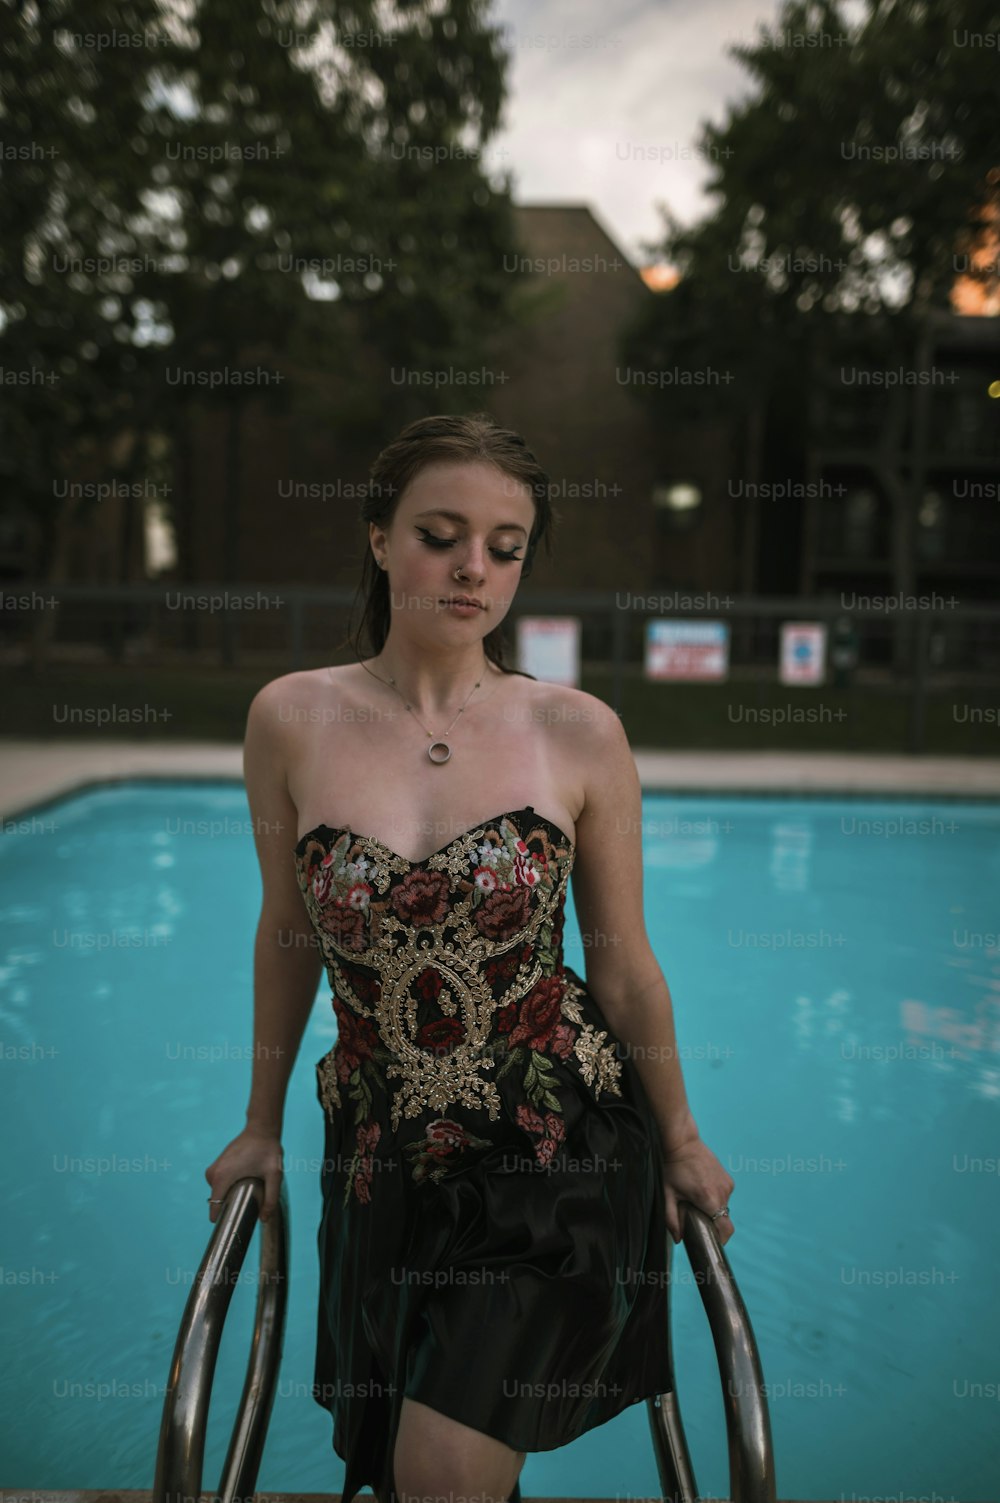 a woman in a strapless dress holding a hand rail near a swimming pool